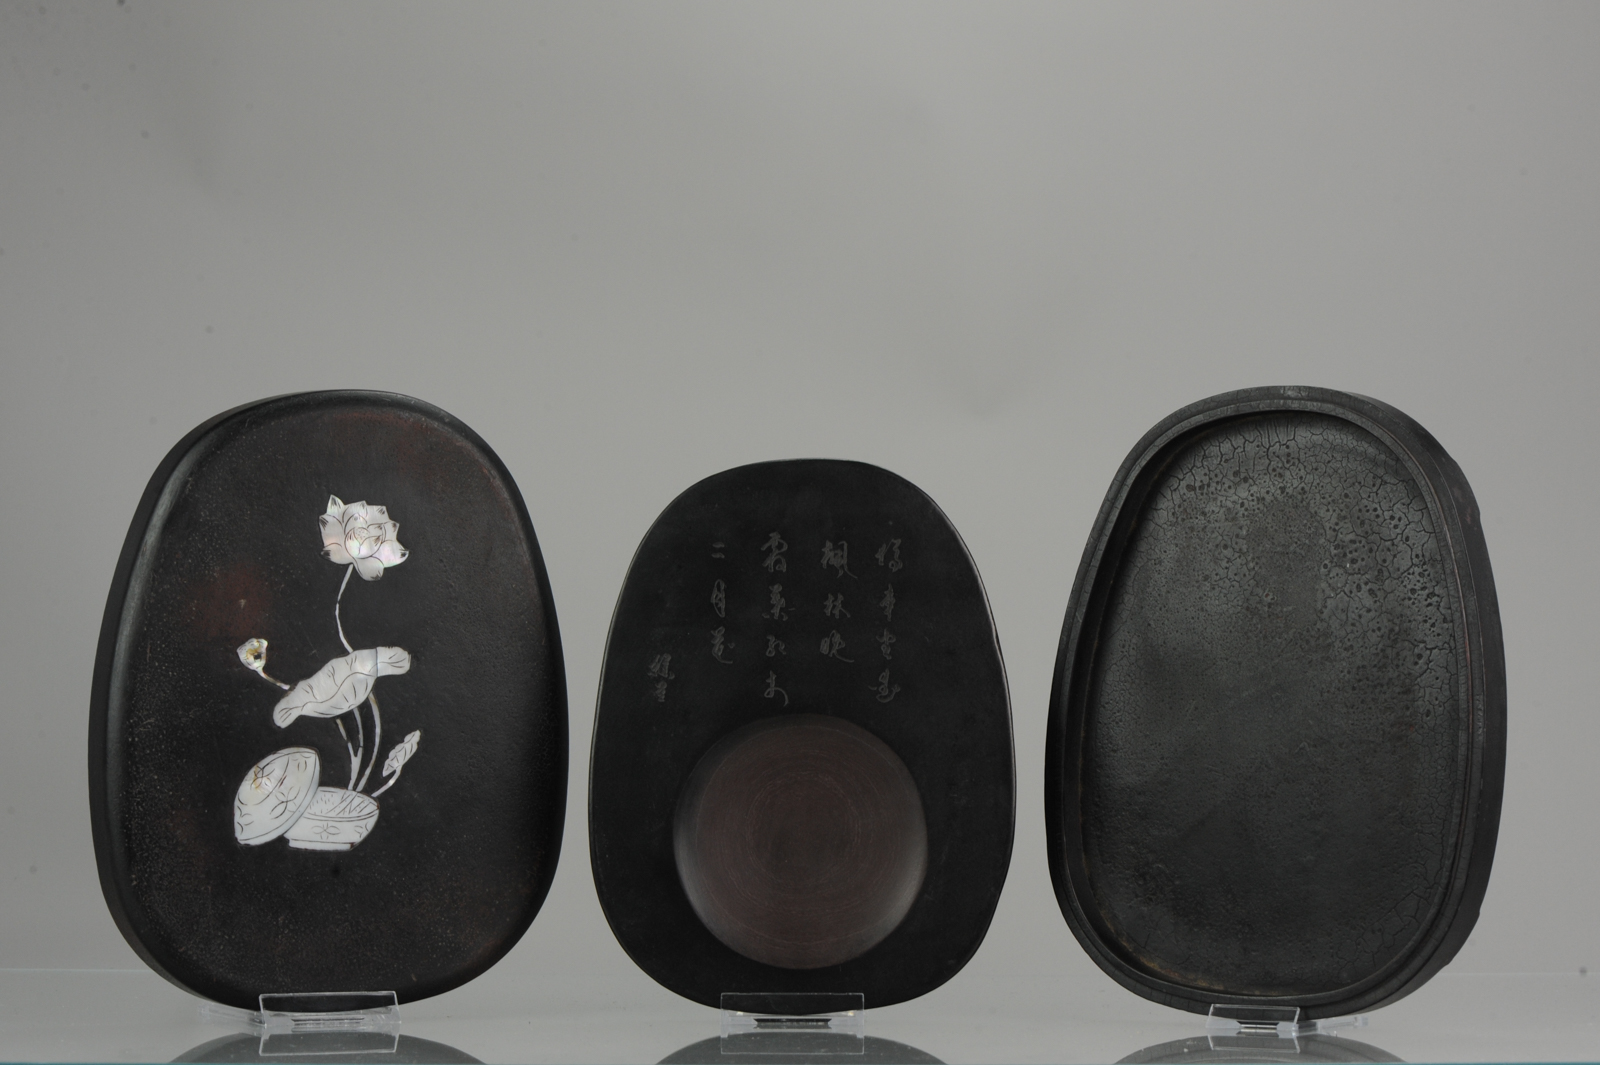 Chinese or Japanese Ink Stone for Calligraphy In Mother of Pearl box